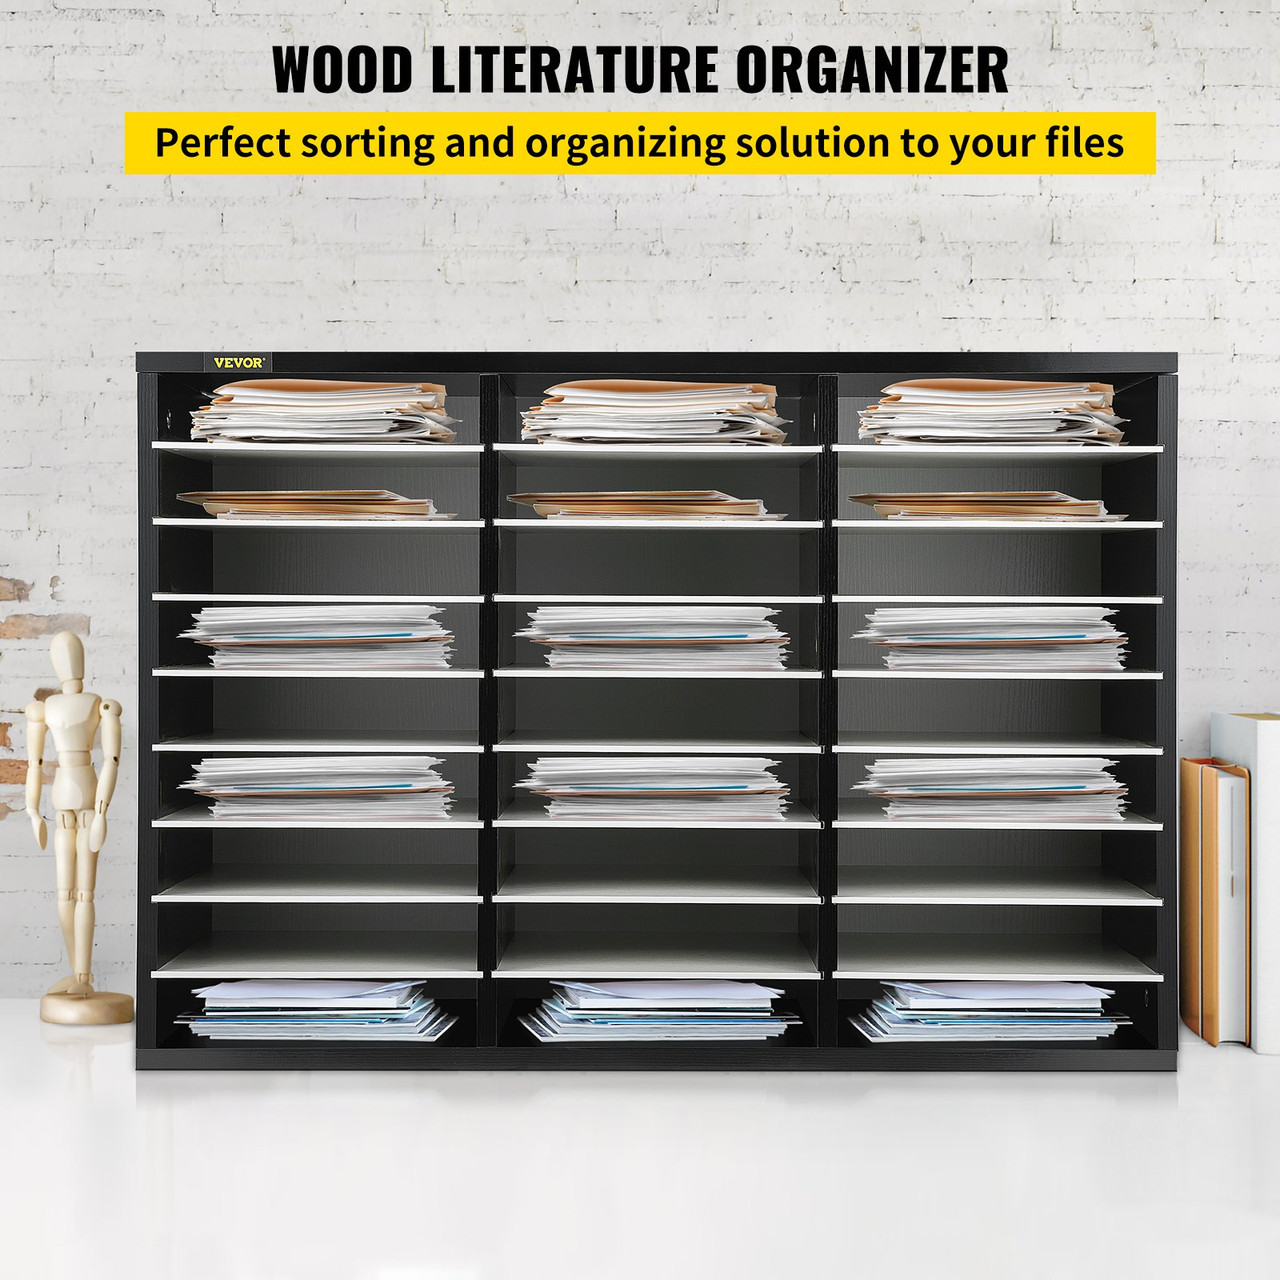 27 Compartments Wood Literature Organizer, Adjustable Shelves, Medium Density Fiberboard Mail Center, Office Home School Storage for Files, Documents, Papers, Magazines, Black+White